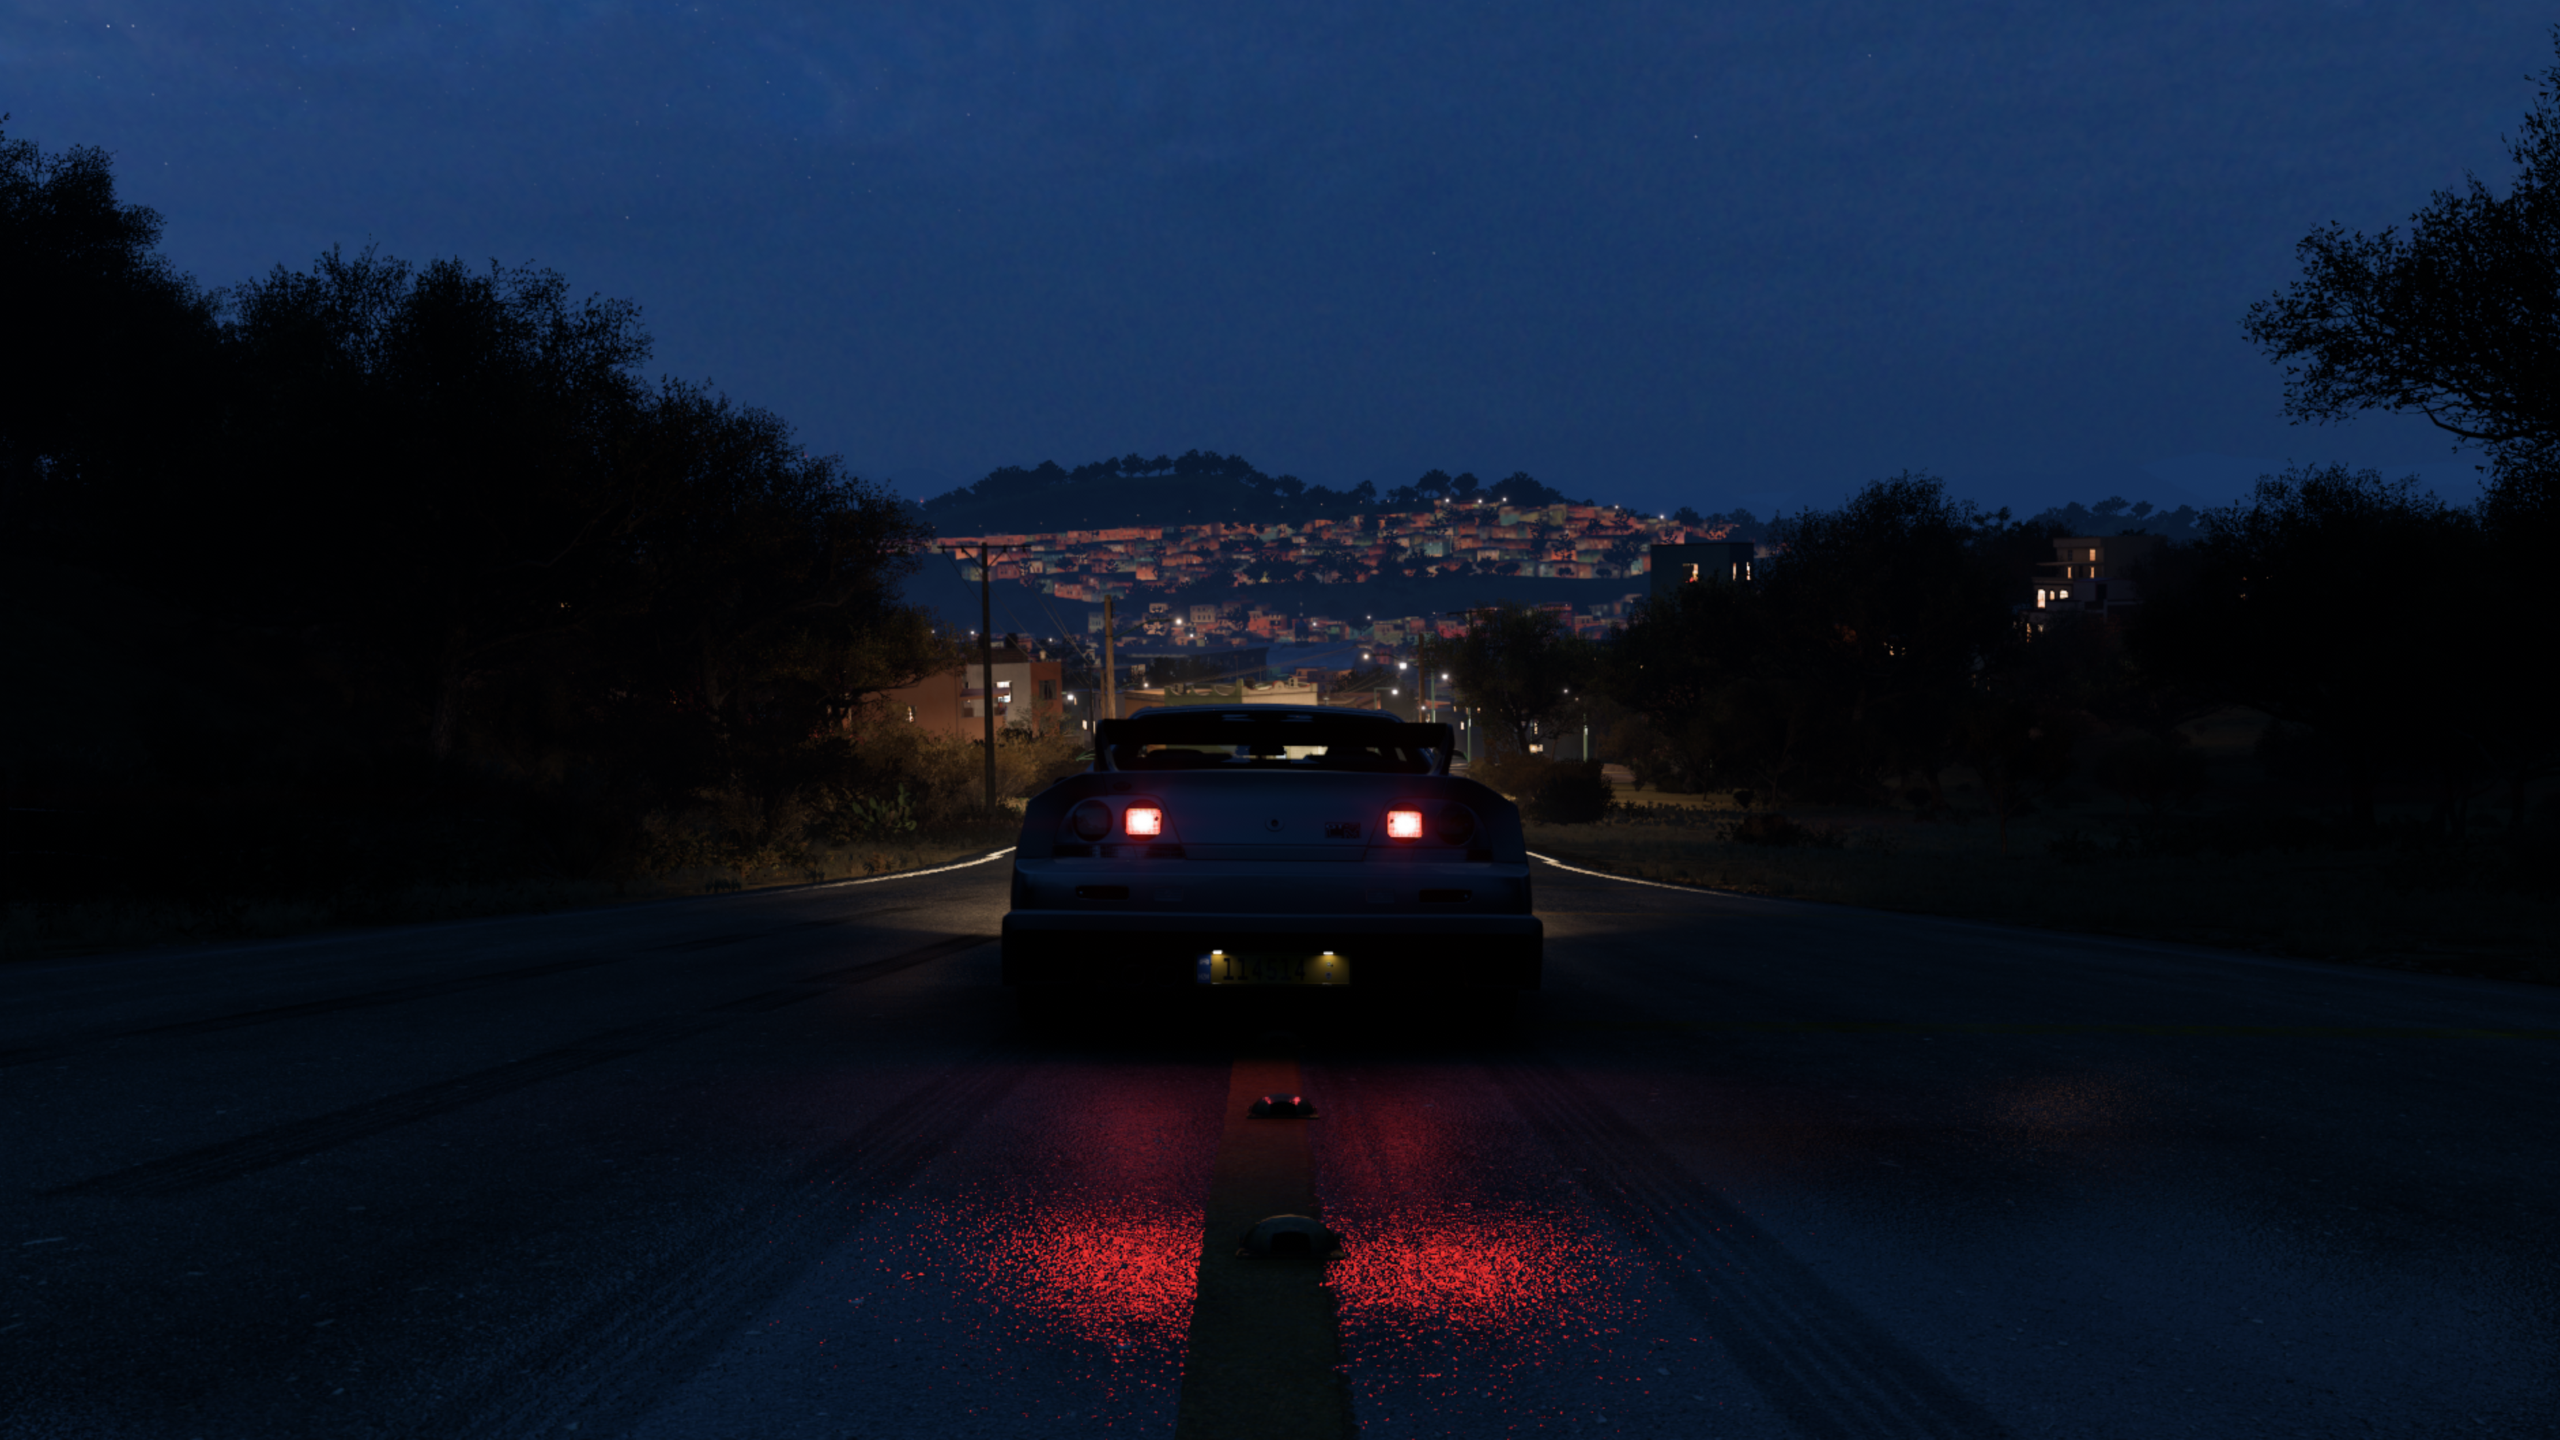 General 2560x1440 Forza Horizon 5 Nvidia RTX Nissan GT-R Nissan Japanese cars video games PlaygroundGames CGI Nissan Skyline R34 car video game art screen shot rear view taillights night driving sky